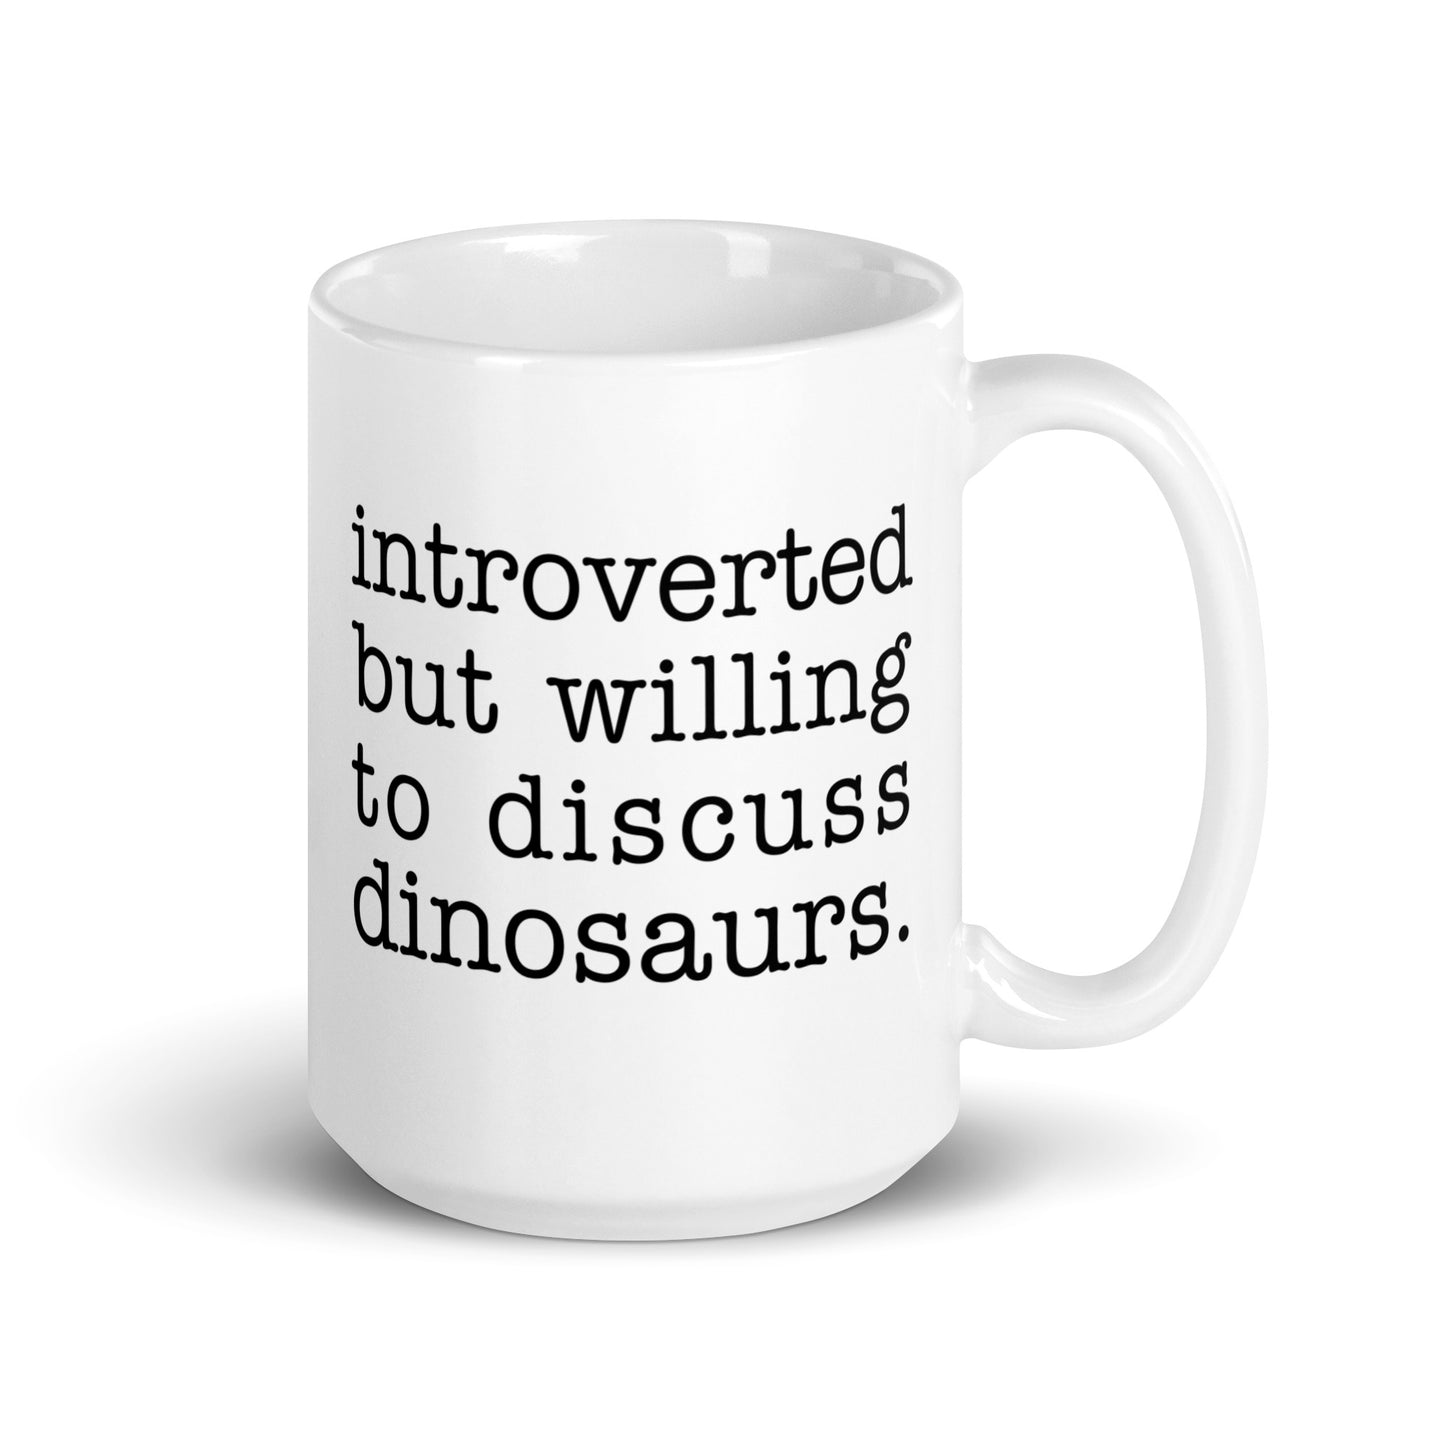 A white 15 ounce ceramic mug with text reading "introverted but willing to discuss dinosaurs"